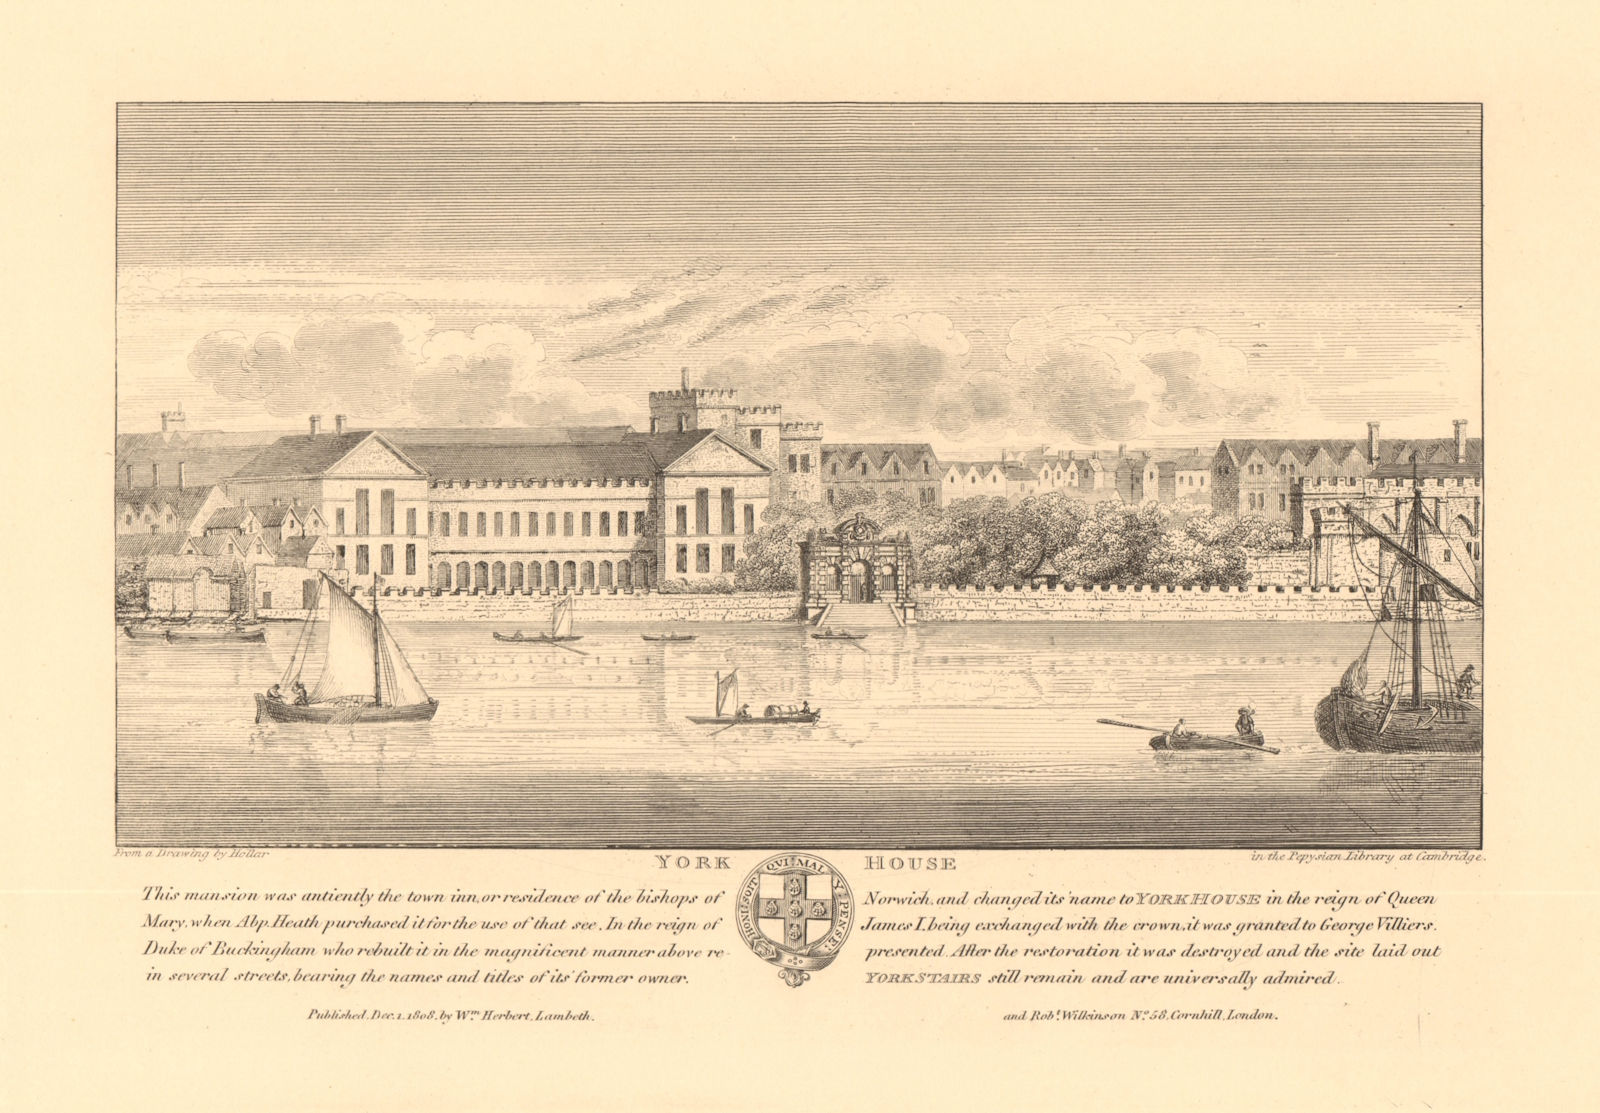 YORK HOUSE, Strand & view of the Thames & watergate. London. After HOLLAR 1834